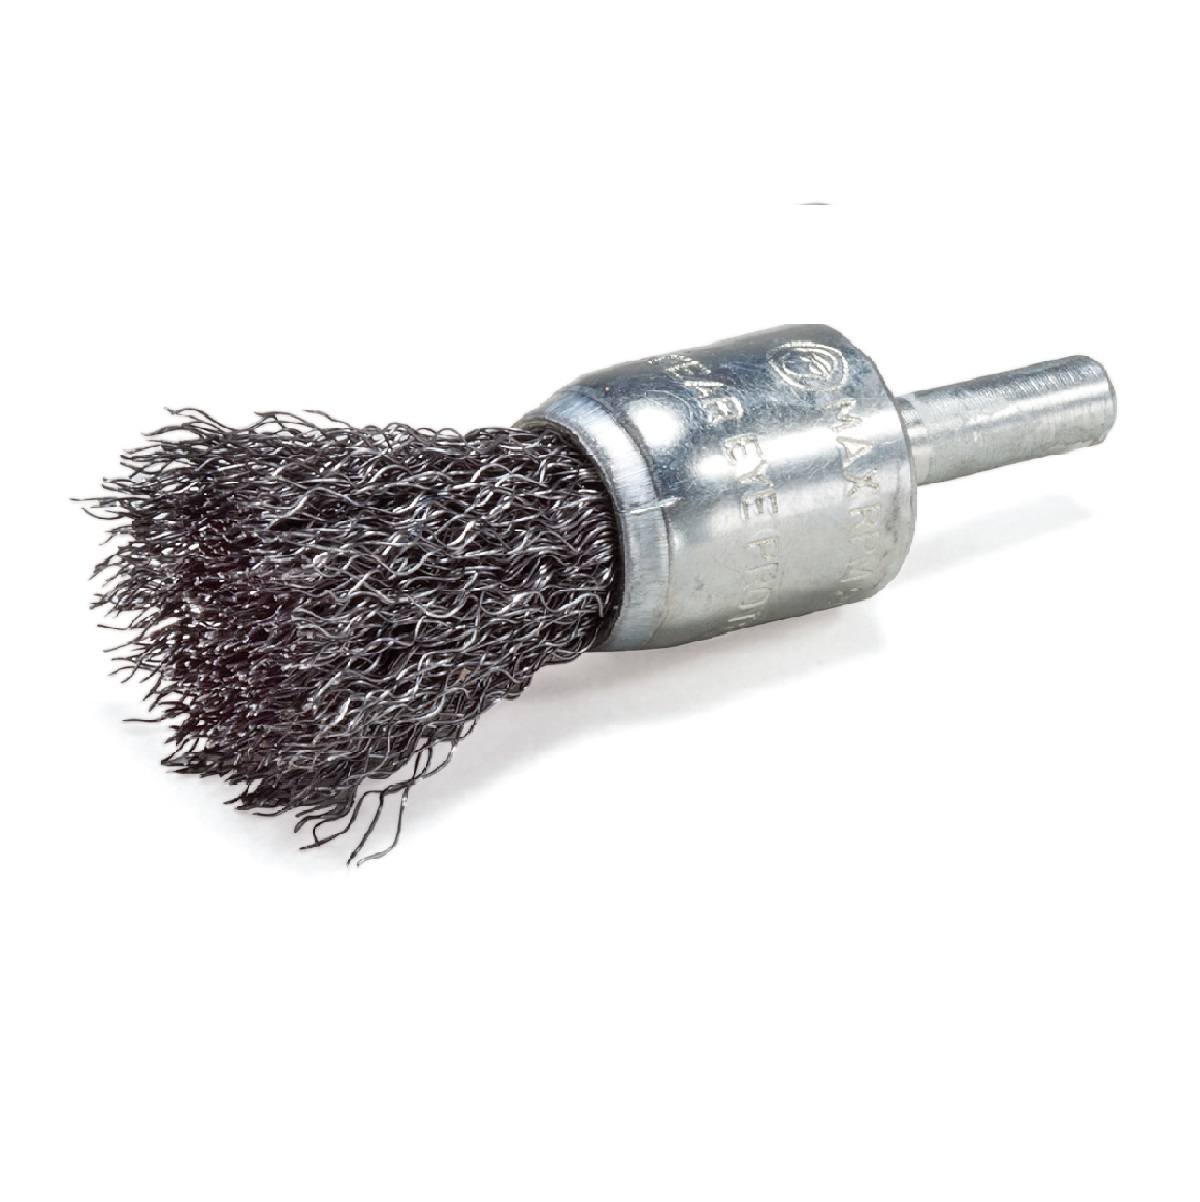 Westward 1GBR5 Knotted Wire End Brush 3/4" x 1/4" Shank 7/8" Trim 